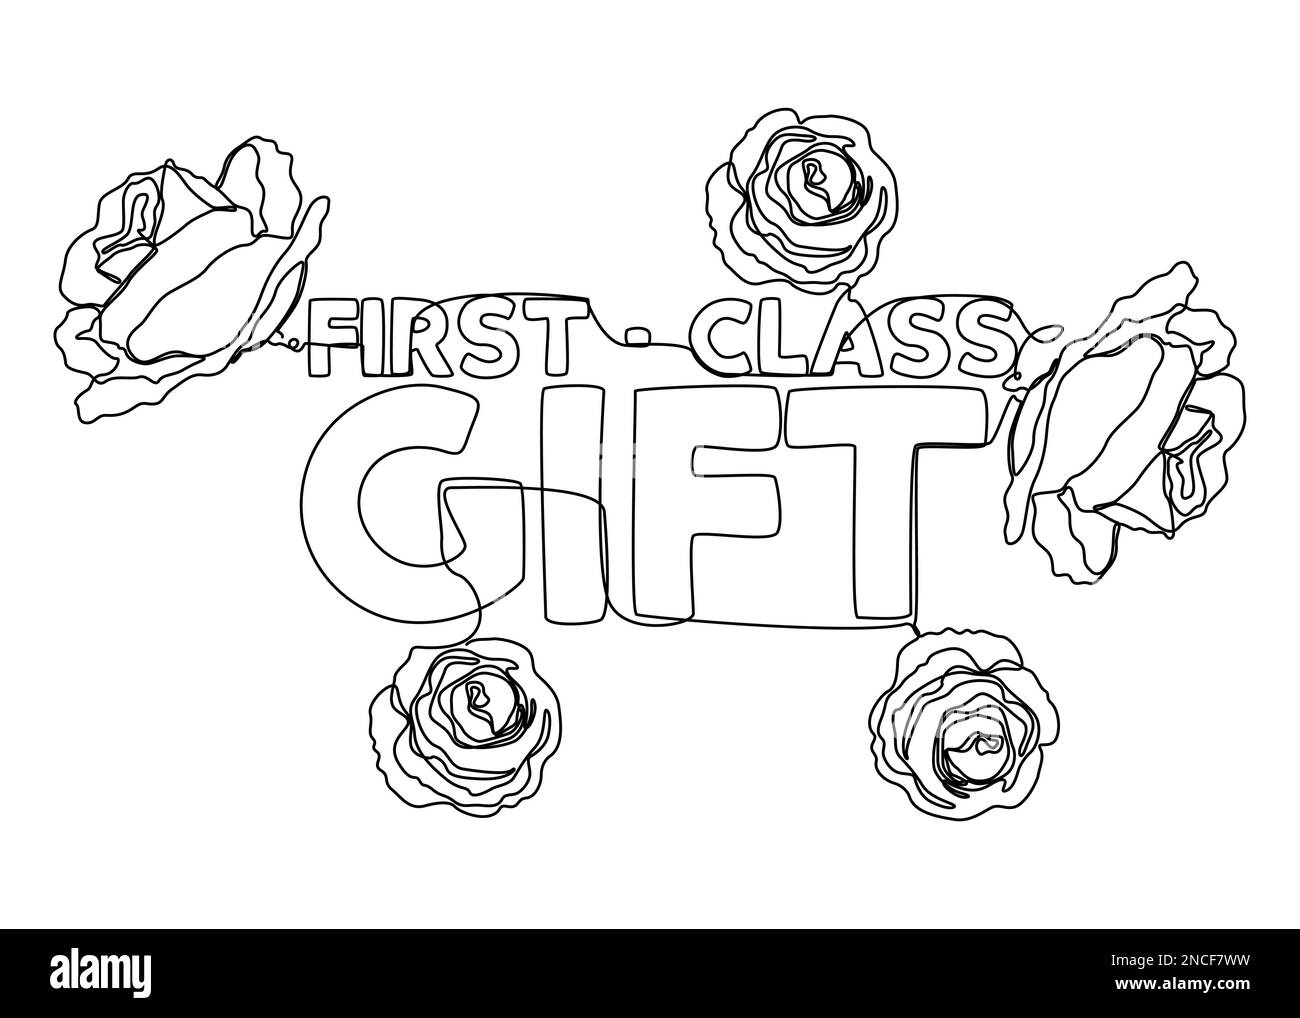 One continuous line of First-Class Gift word with rose flowers. Thin Line Illustration vector concept. Contour Drawing Creative ideas. Stock Vector